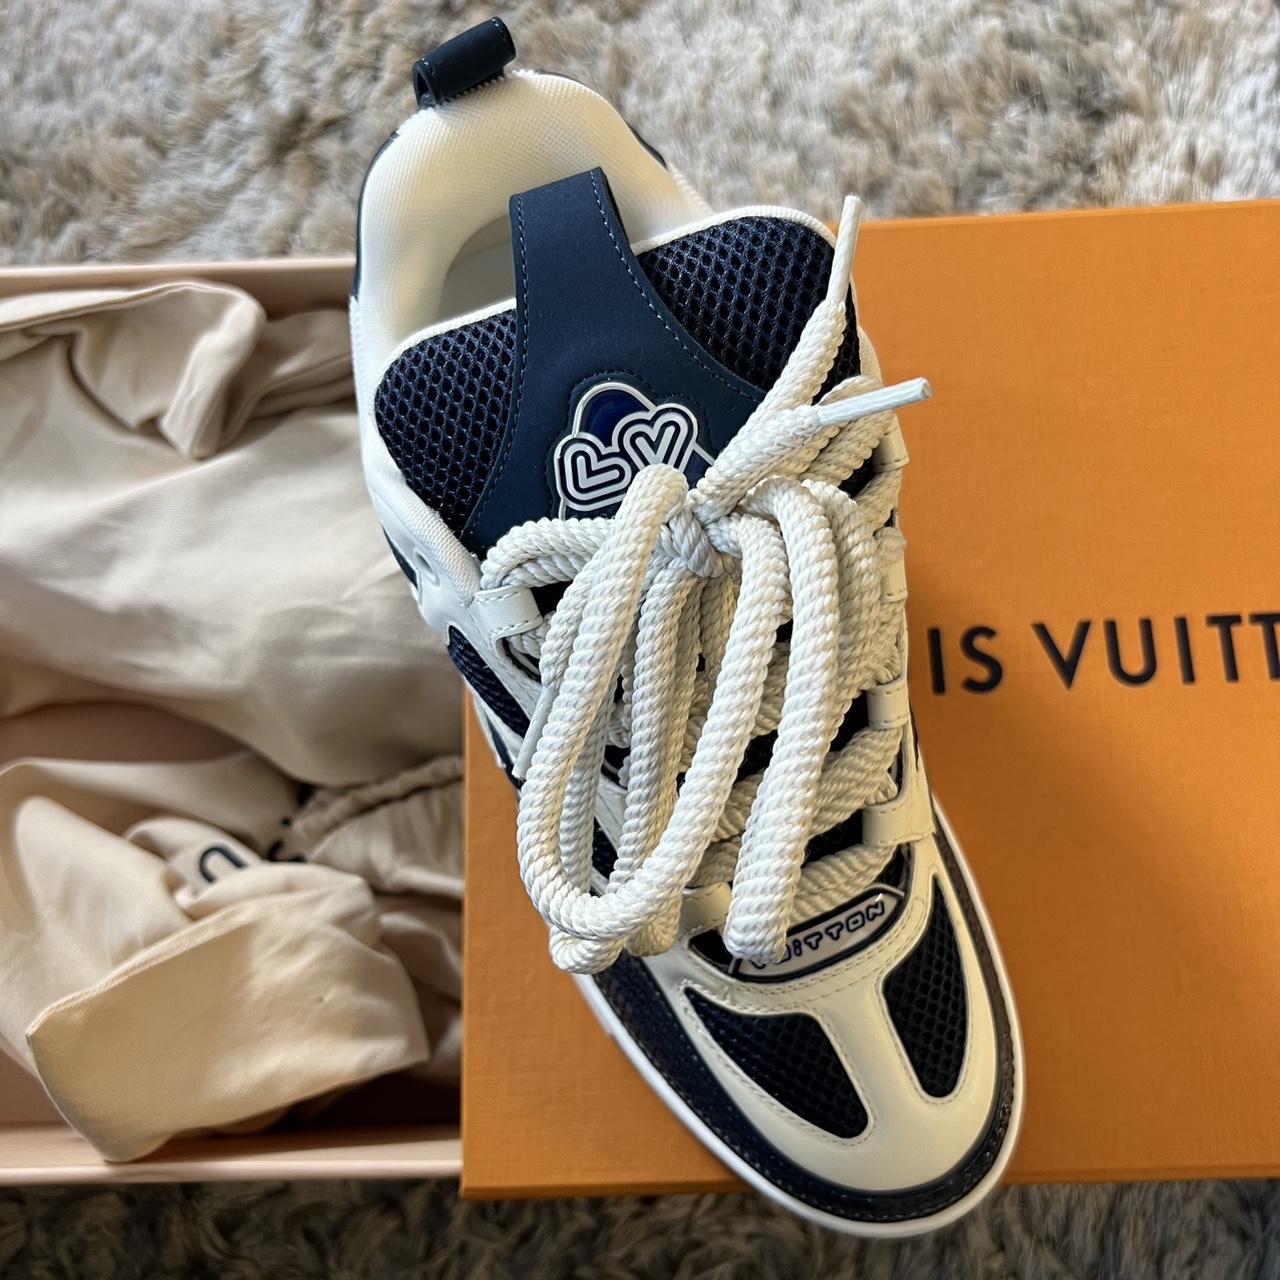 Louis Vuitton sneakers in very good conditions size 7 - Depop